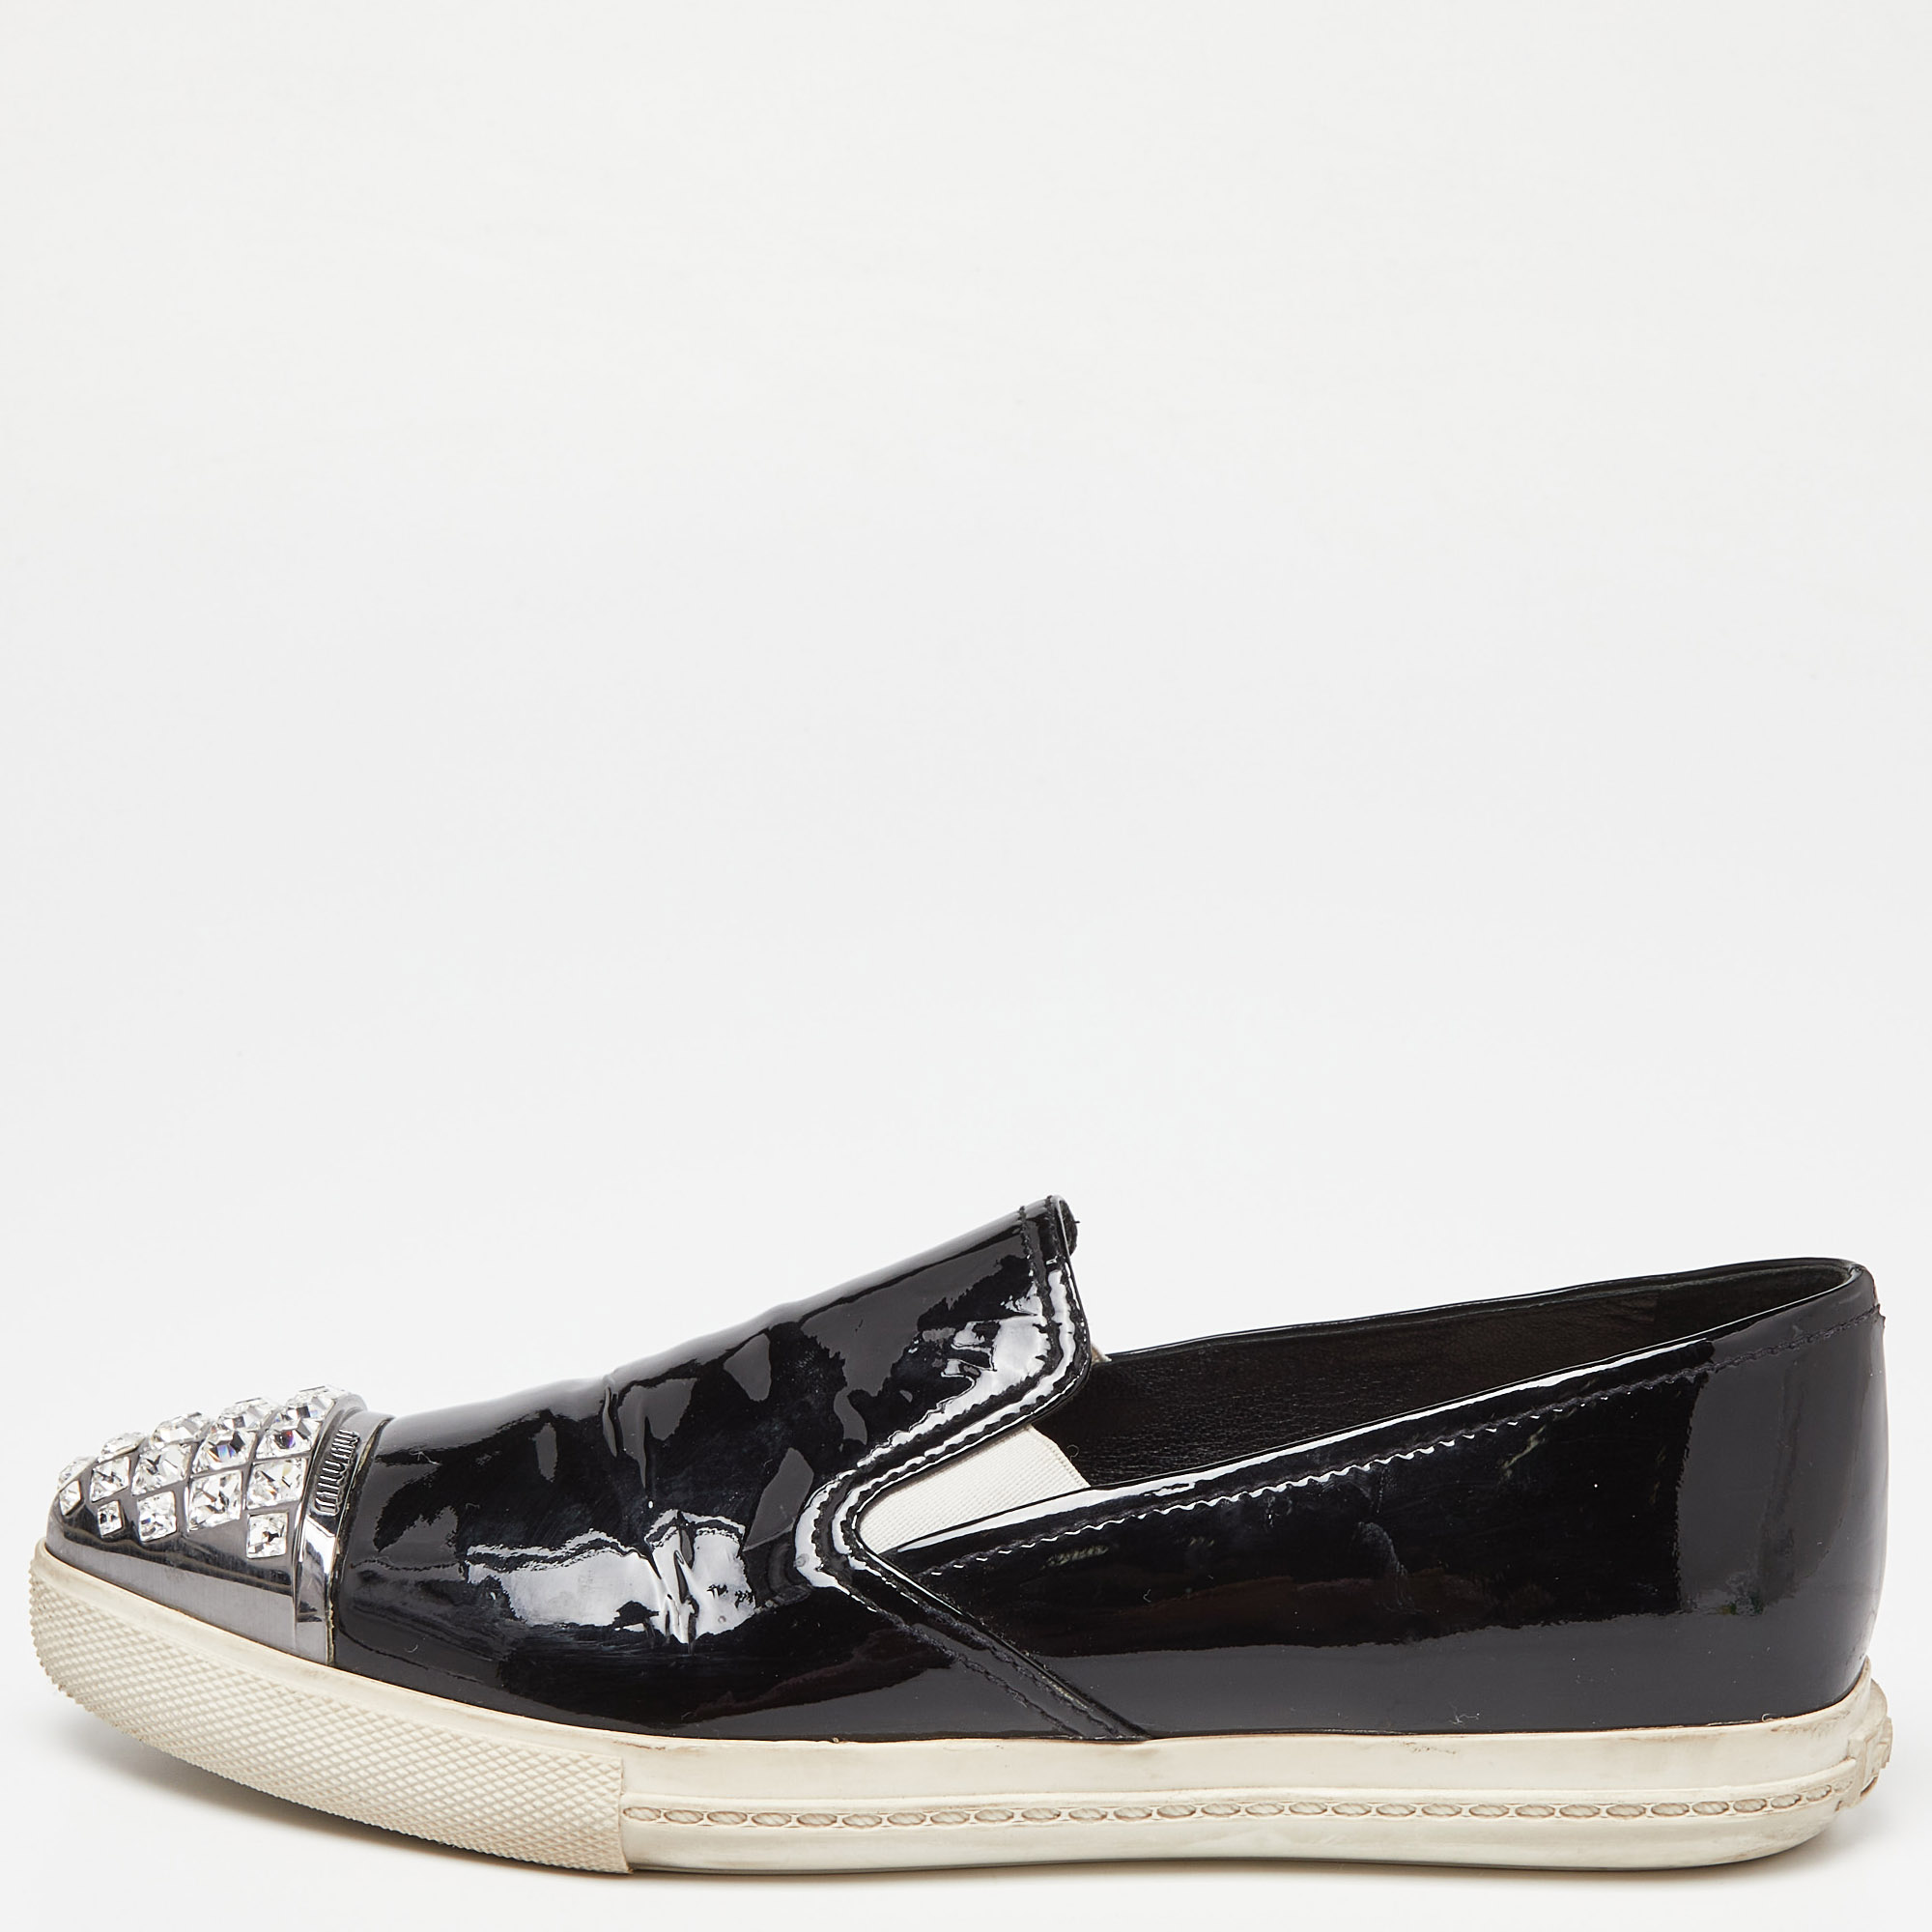 Pre-owned Miu Miu Black Patent Leather Crystals Embellished Slip On Loafers Size 37